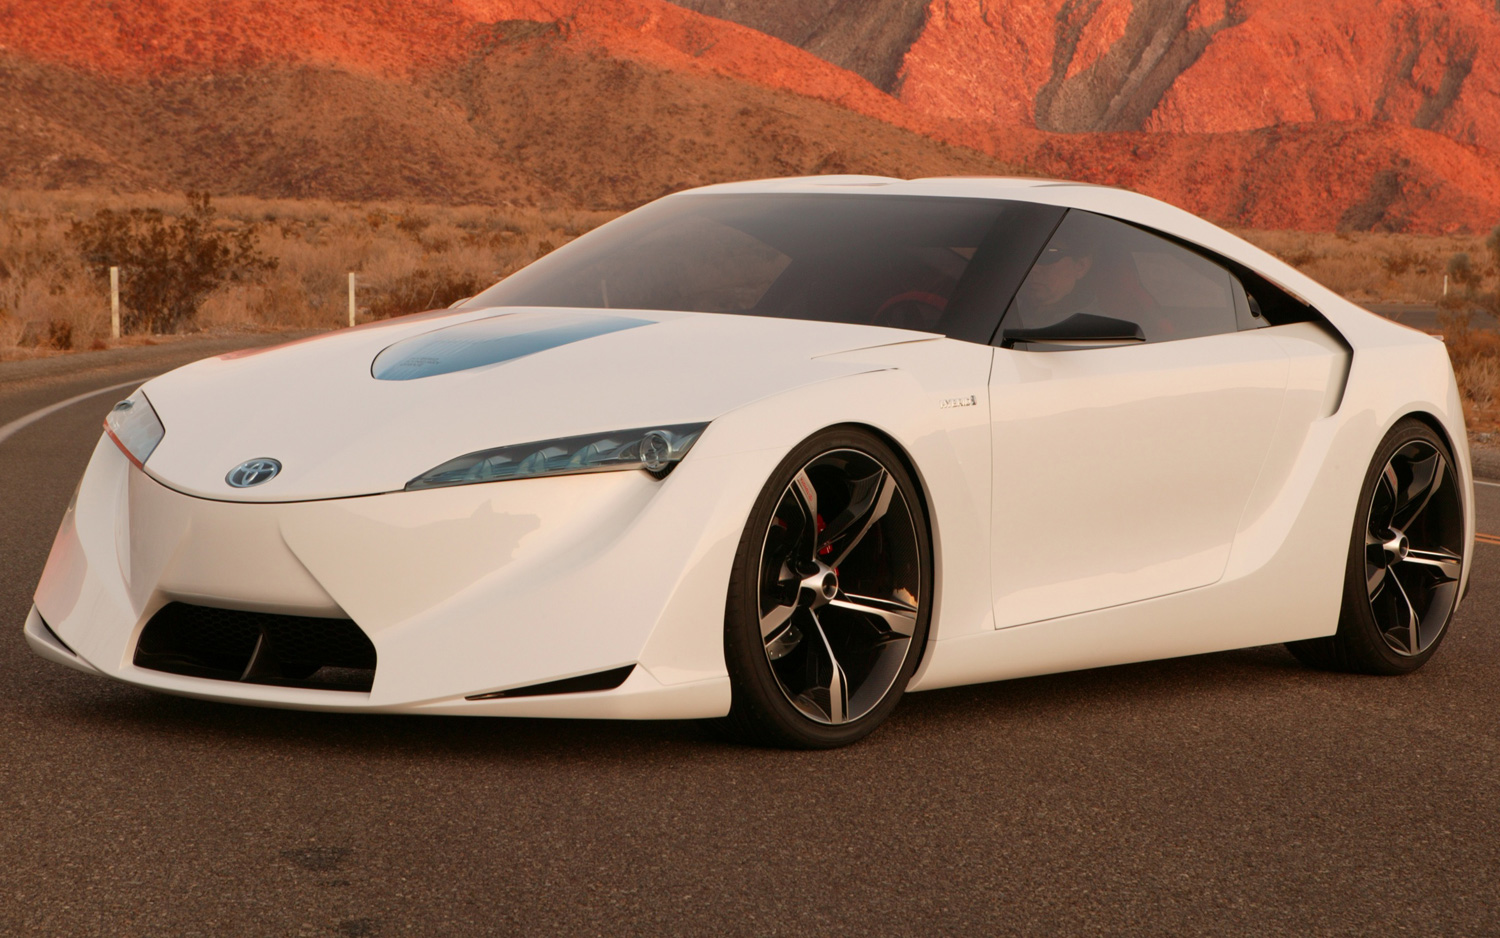 toyota-ft-hs-concept-front-side-view.jpg